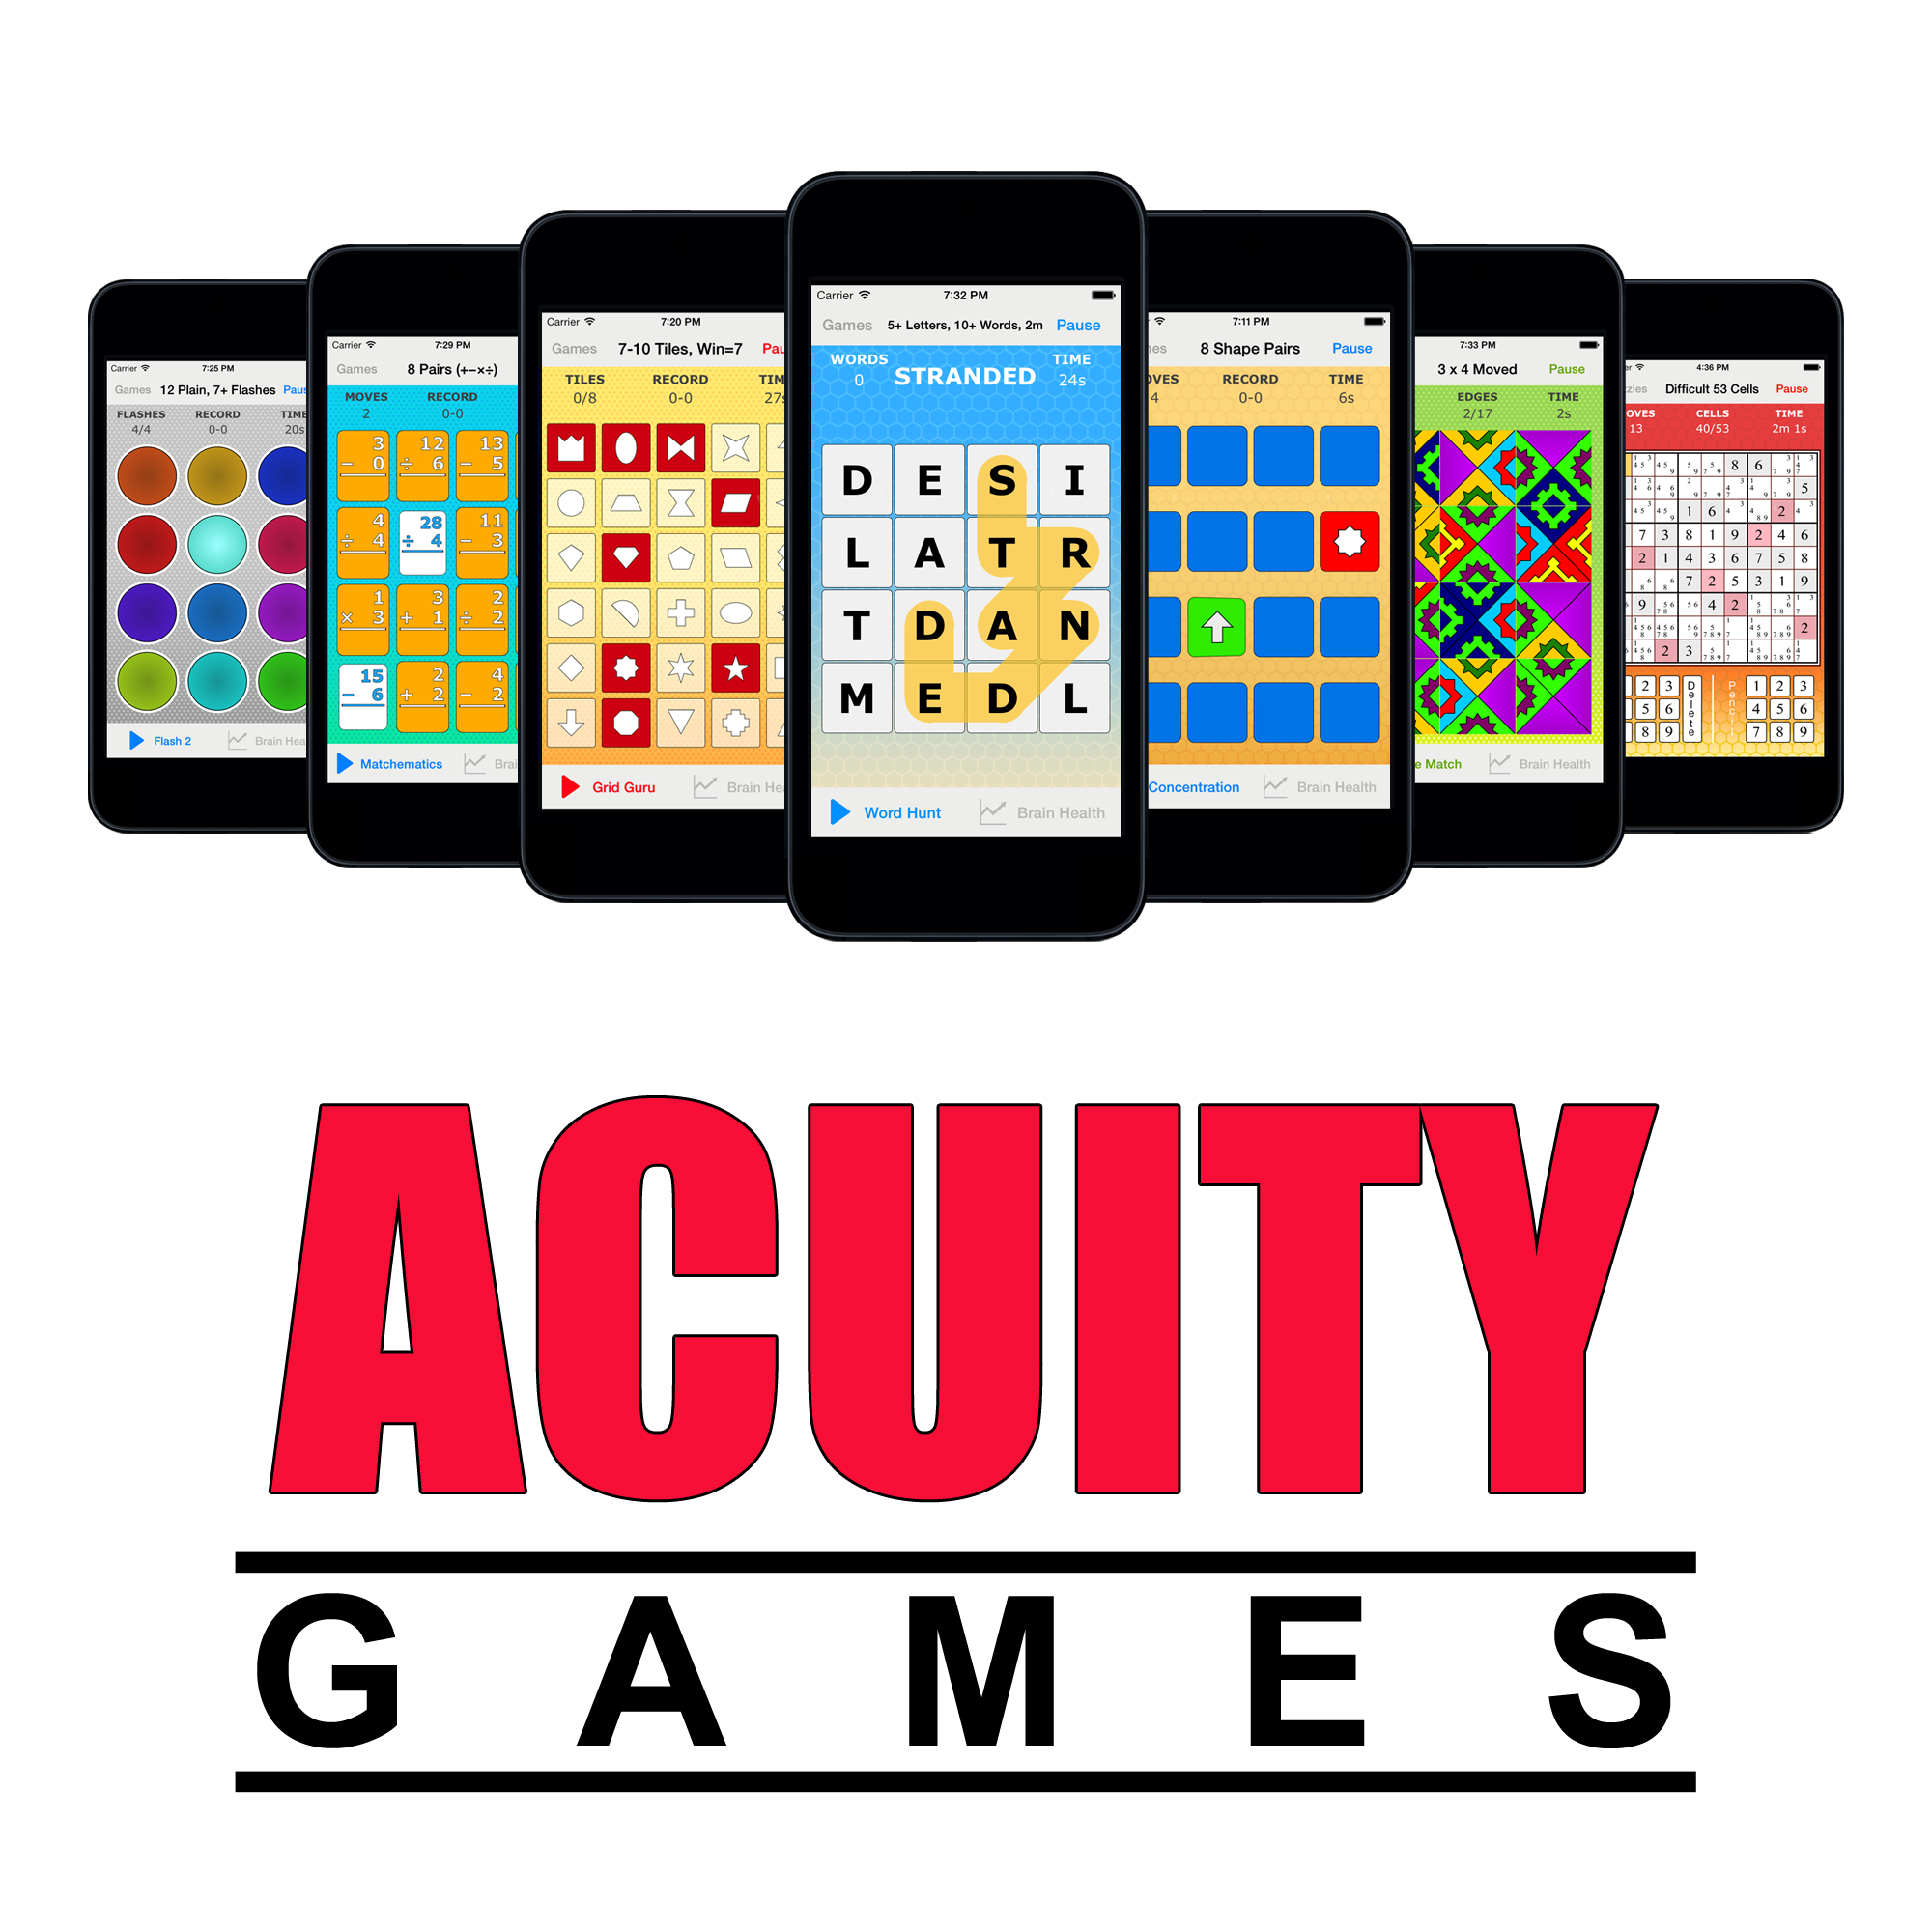 brain-games-developer-acuity-games-releases-version-8-0-for-iphone-and-ipad